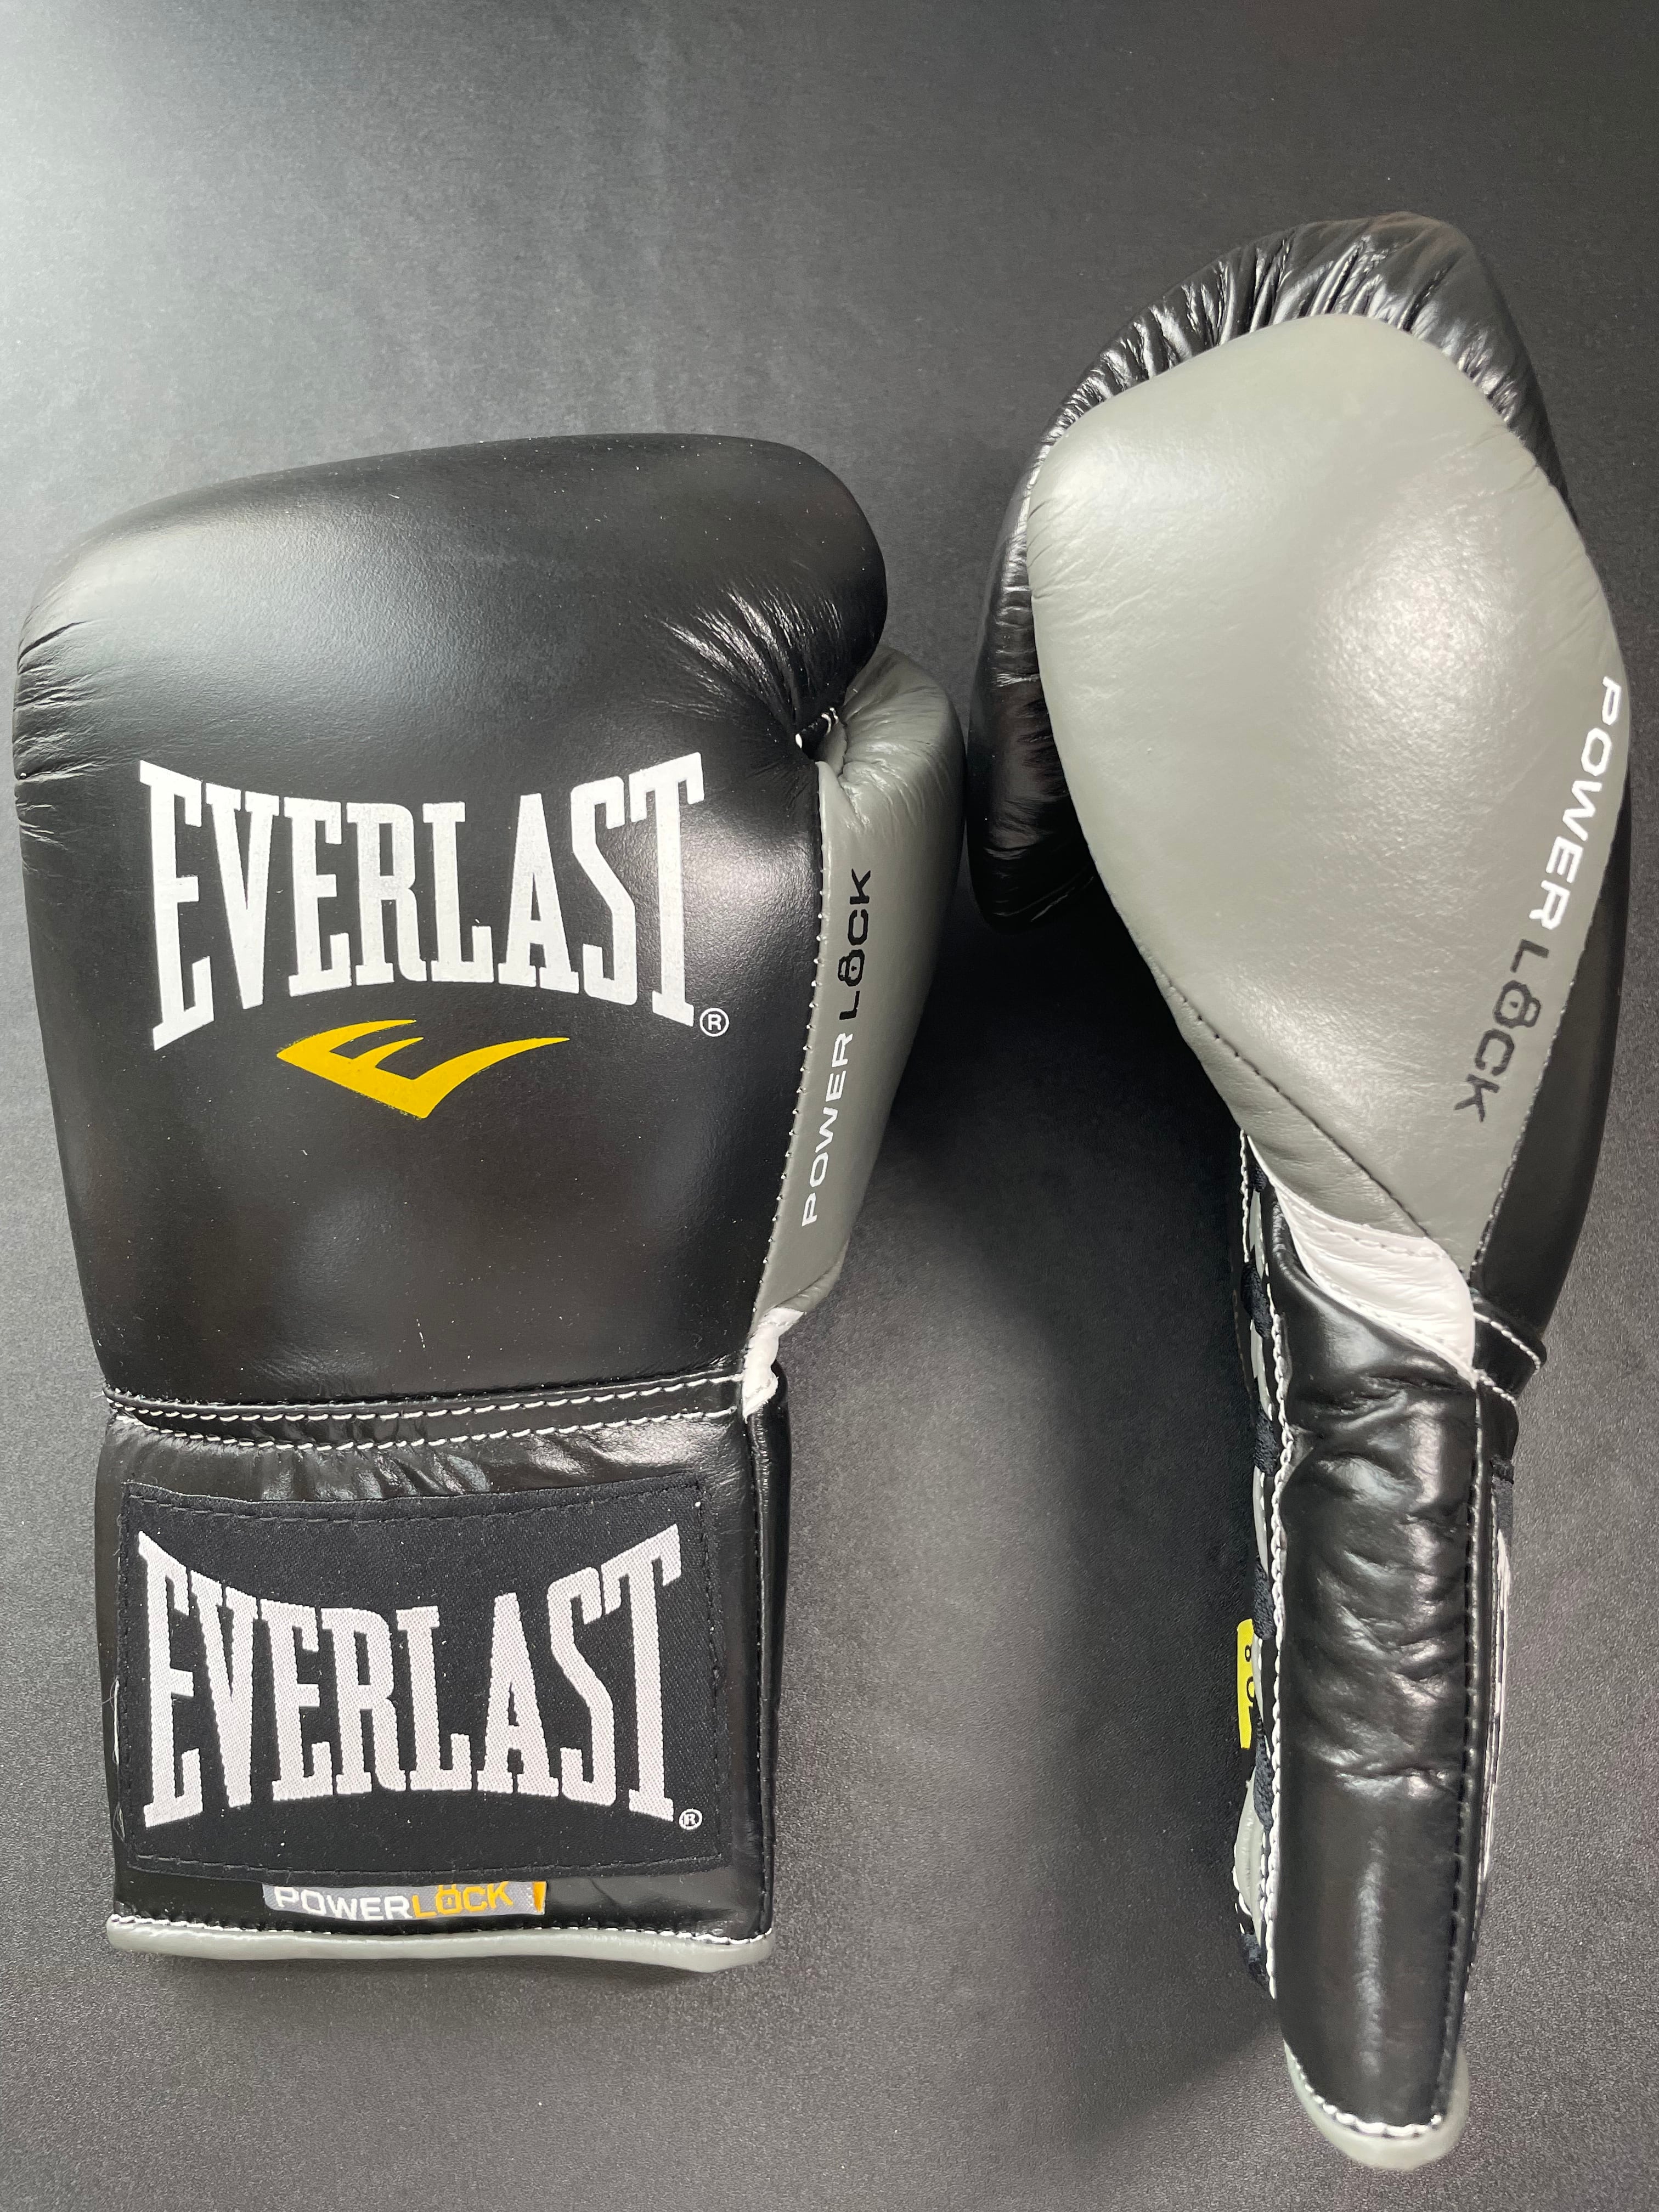 Everlast パワーロック プロファイトグローブ 黒/グレー | ボクシング格闘技専門店　OLDROOKIE powered by BASE